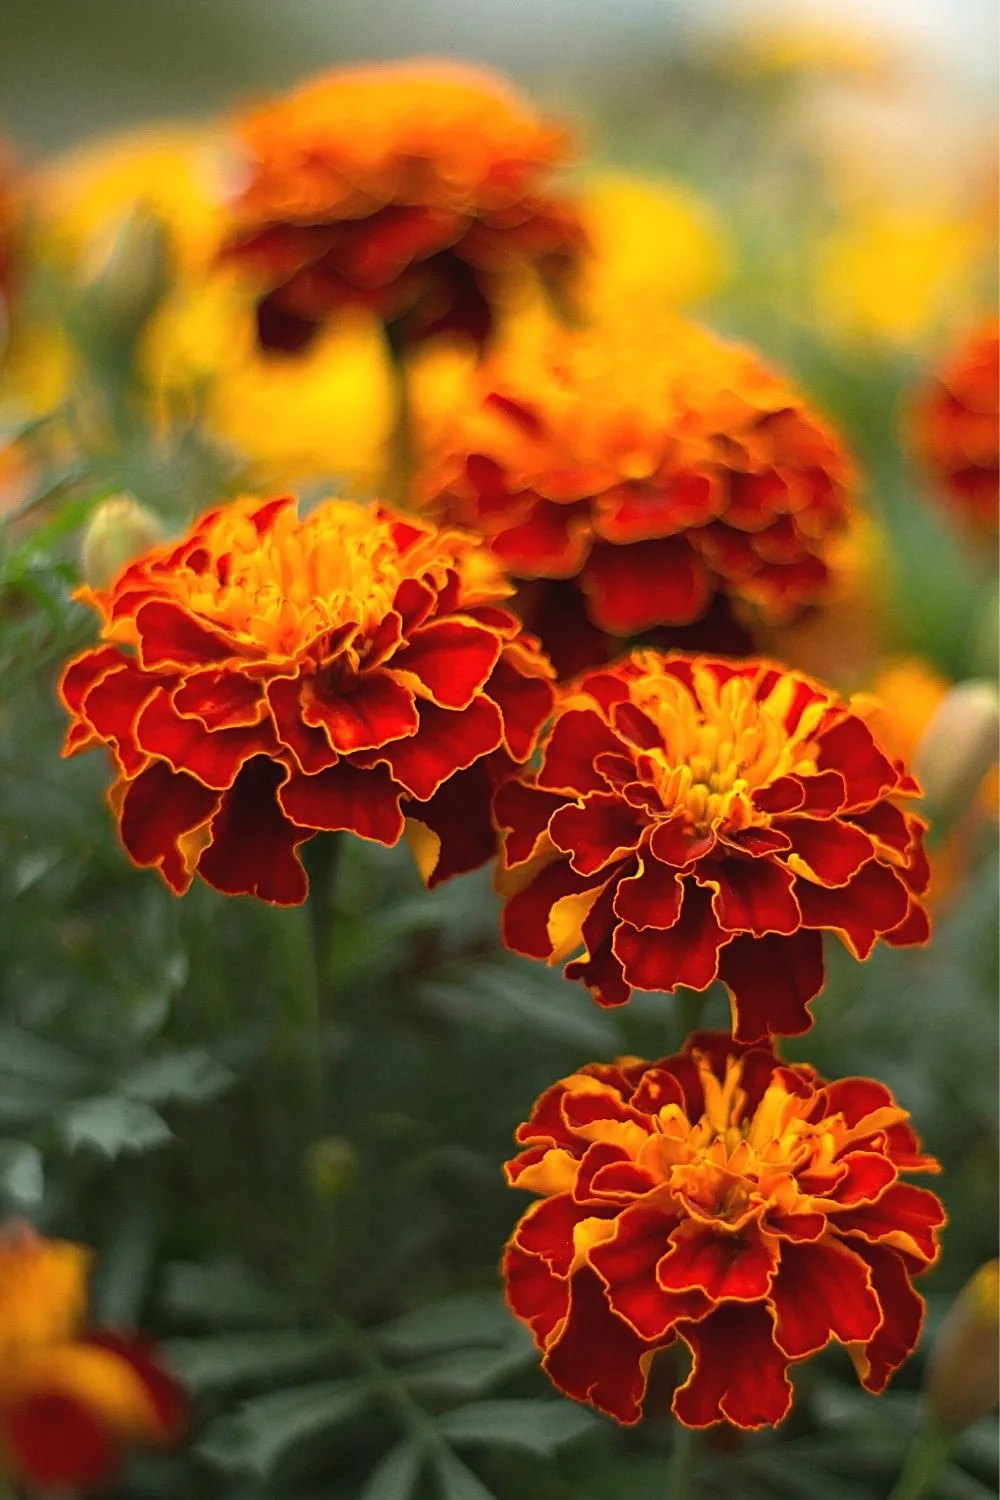 Marigold is another sunshine-colored plant that you can grow in your west-facing balcony